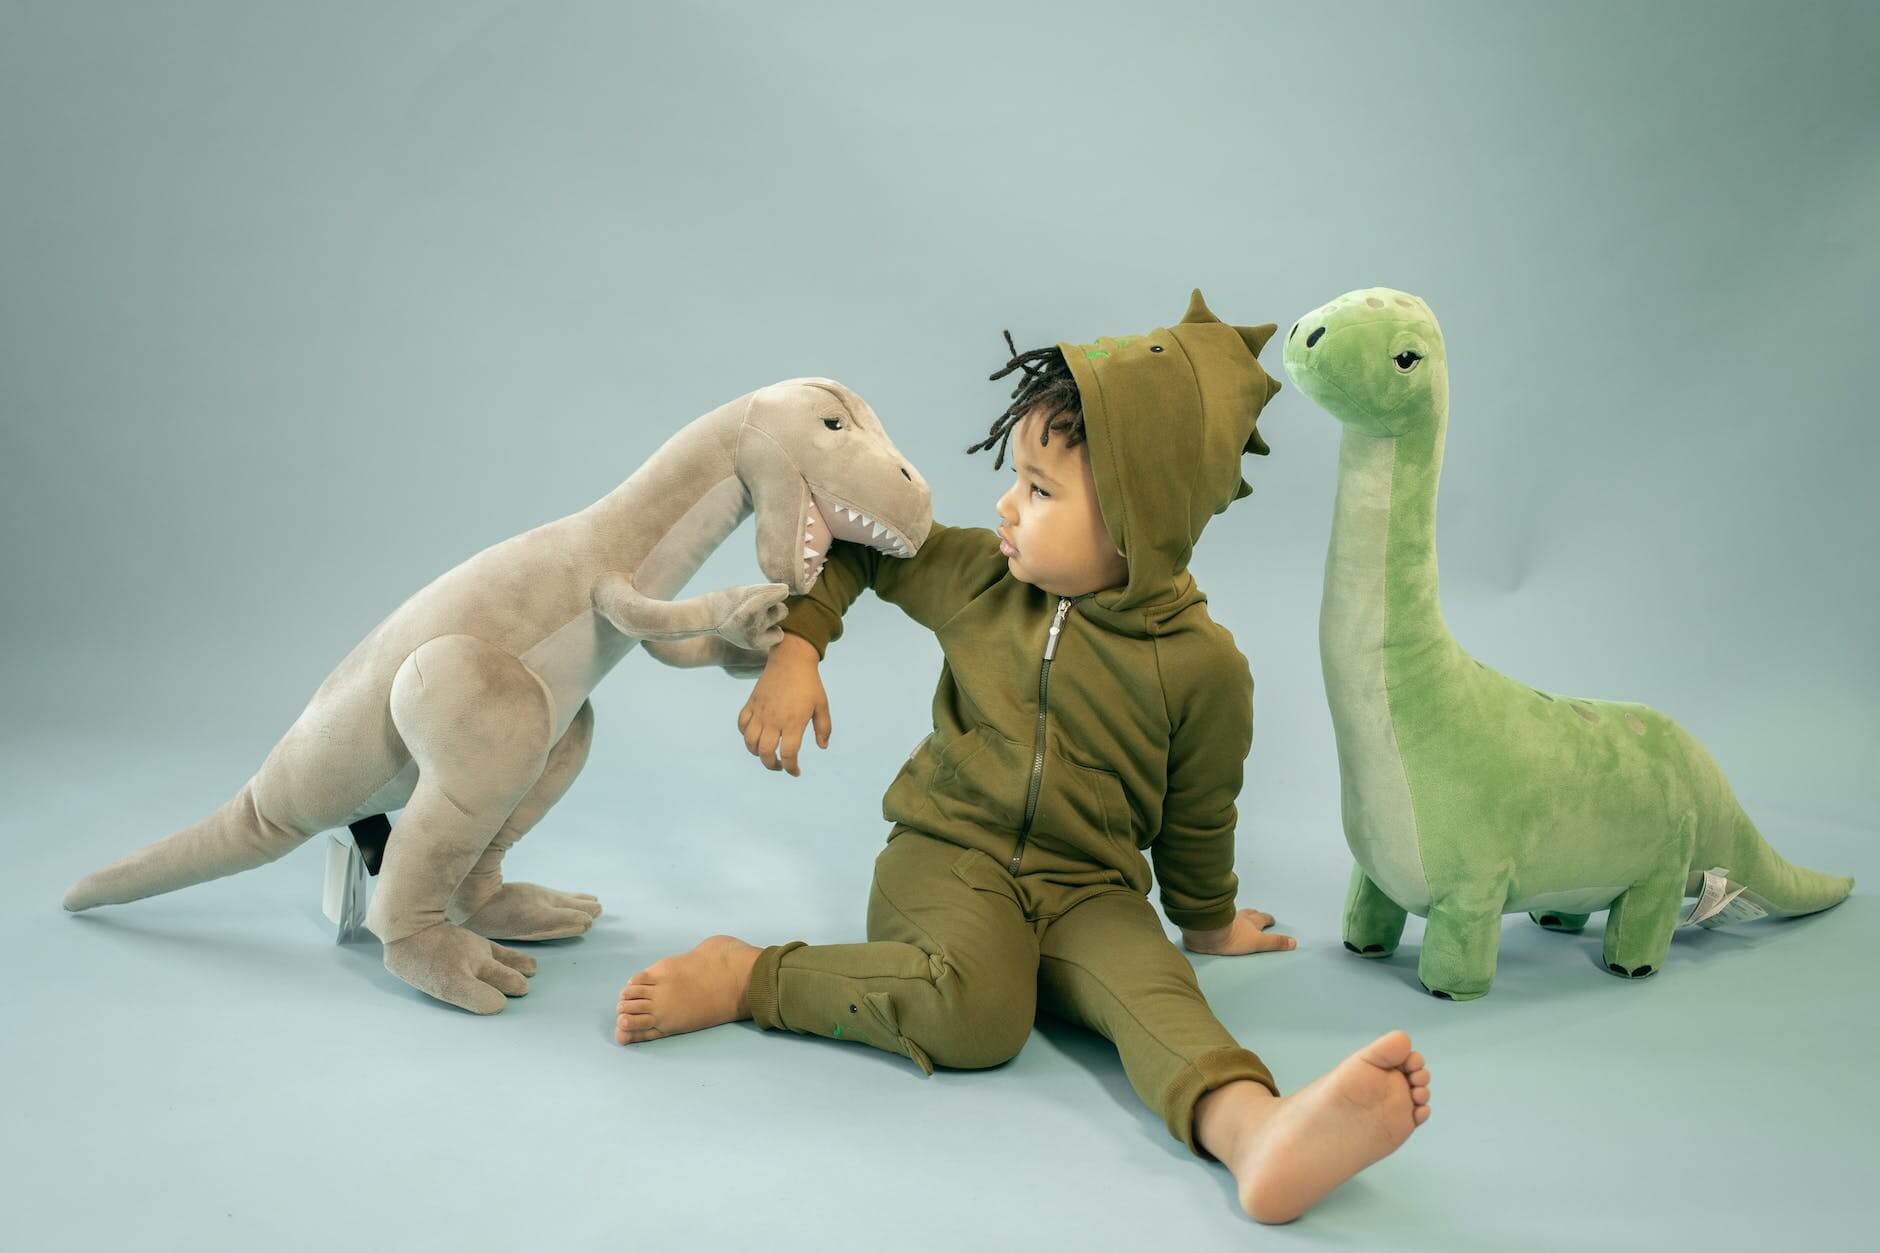 black boy with toy dinosaurs on light background